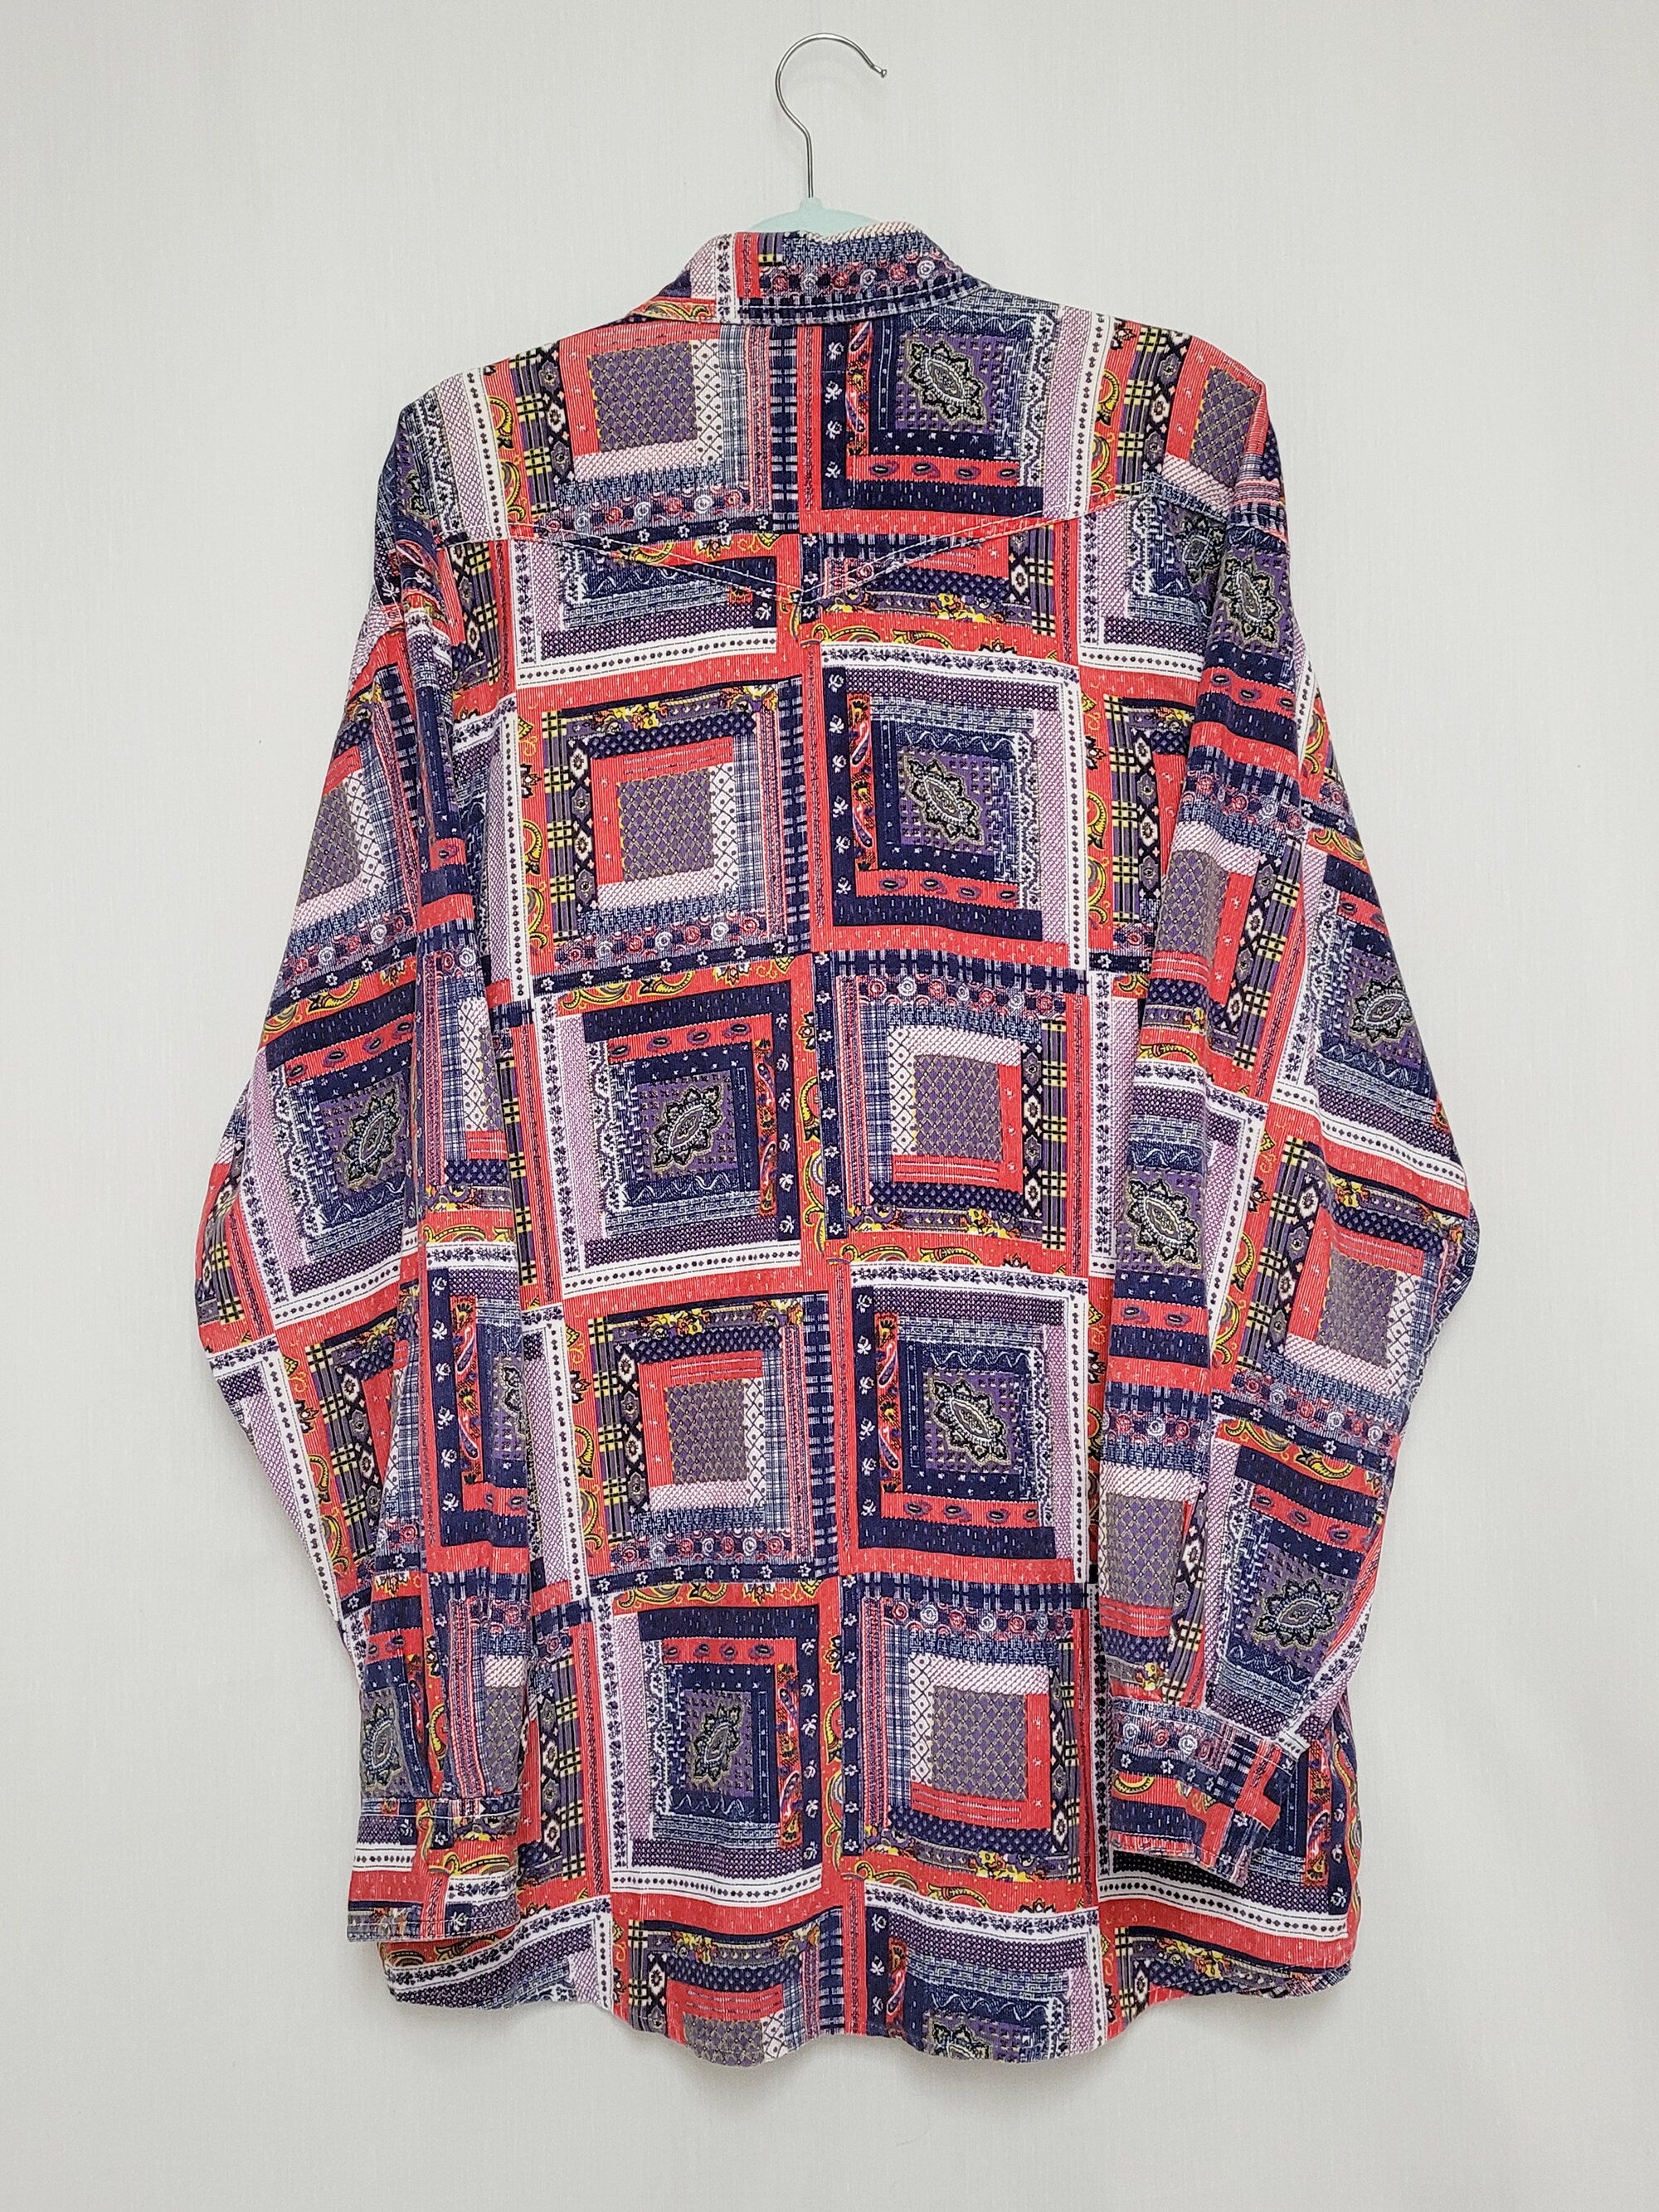 Vintage 90s menswear abstract colorful unisex oversize shirt